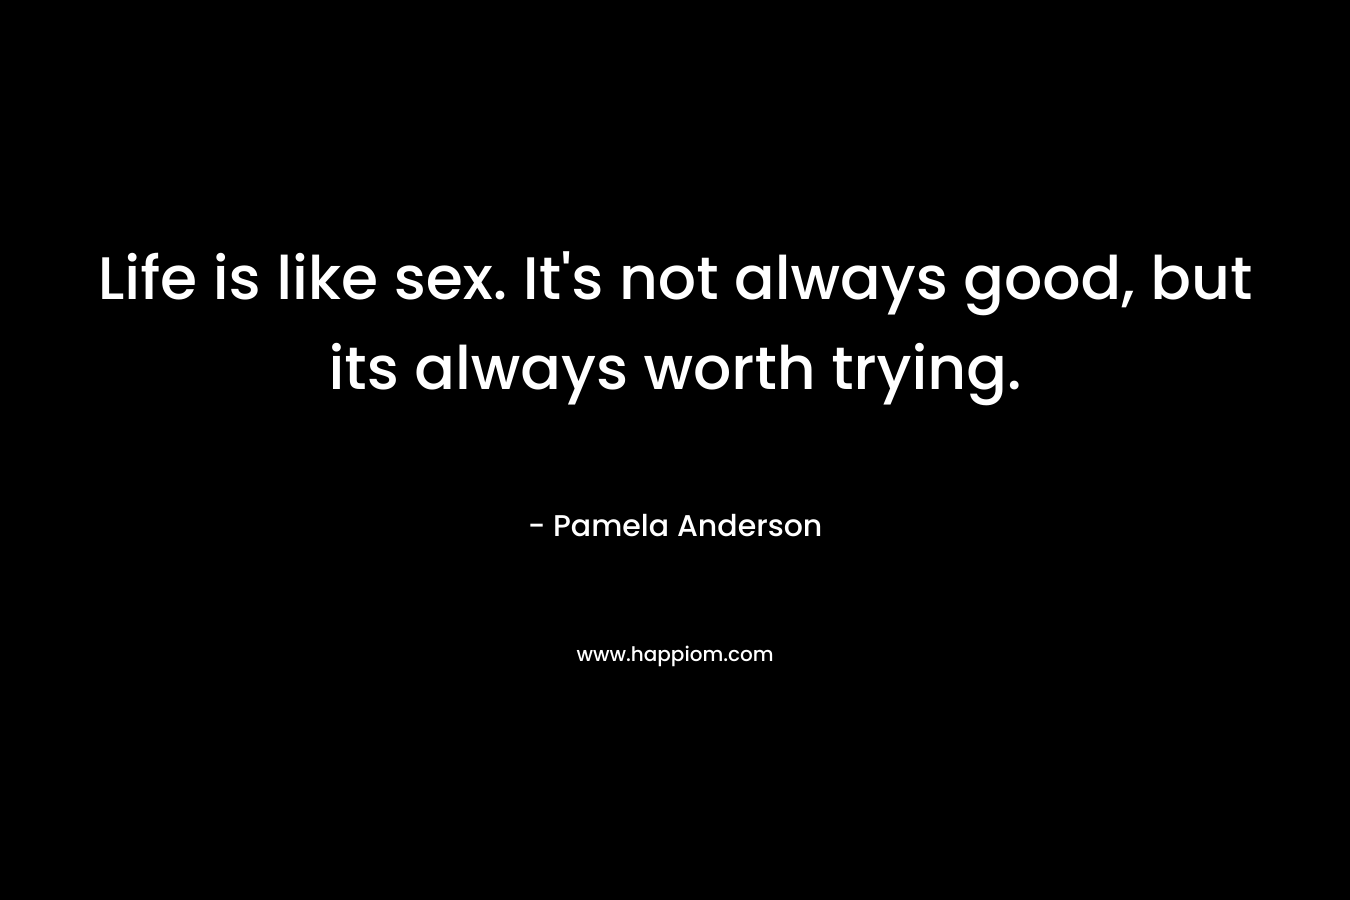 Life is like sex. It’s not always good, but its always worth trying. – Pamela Anderson